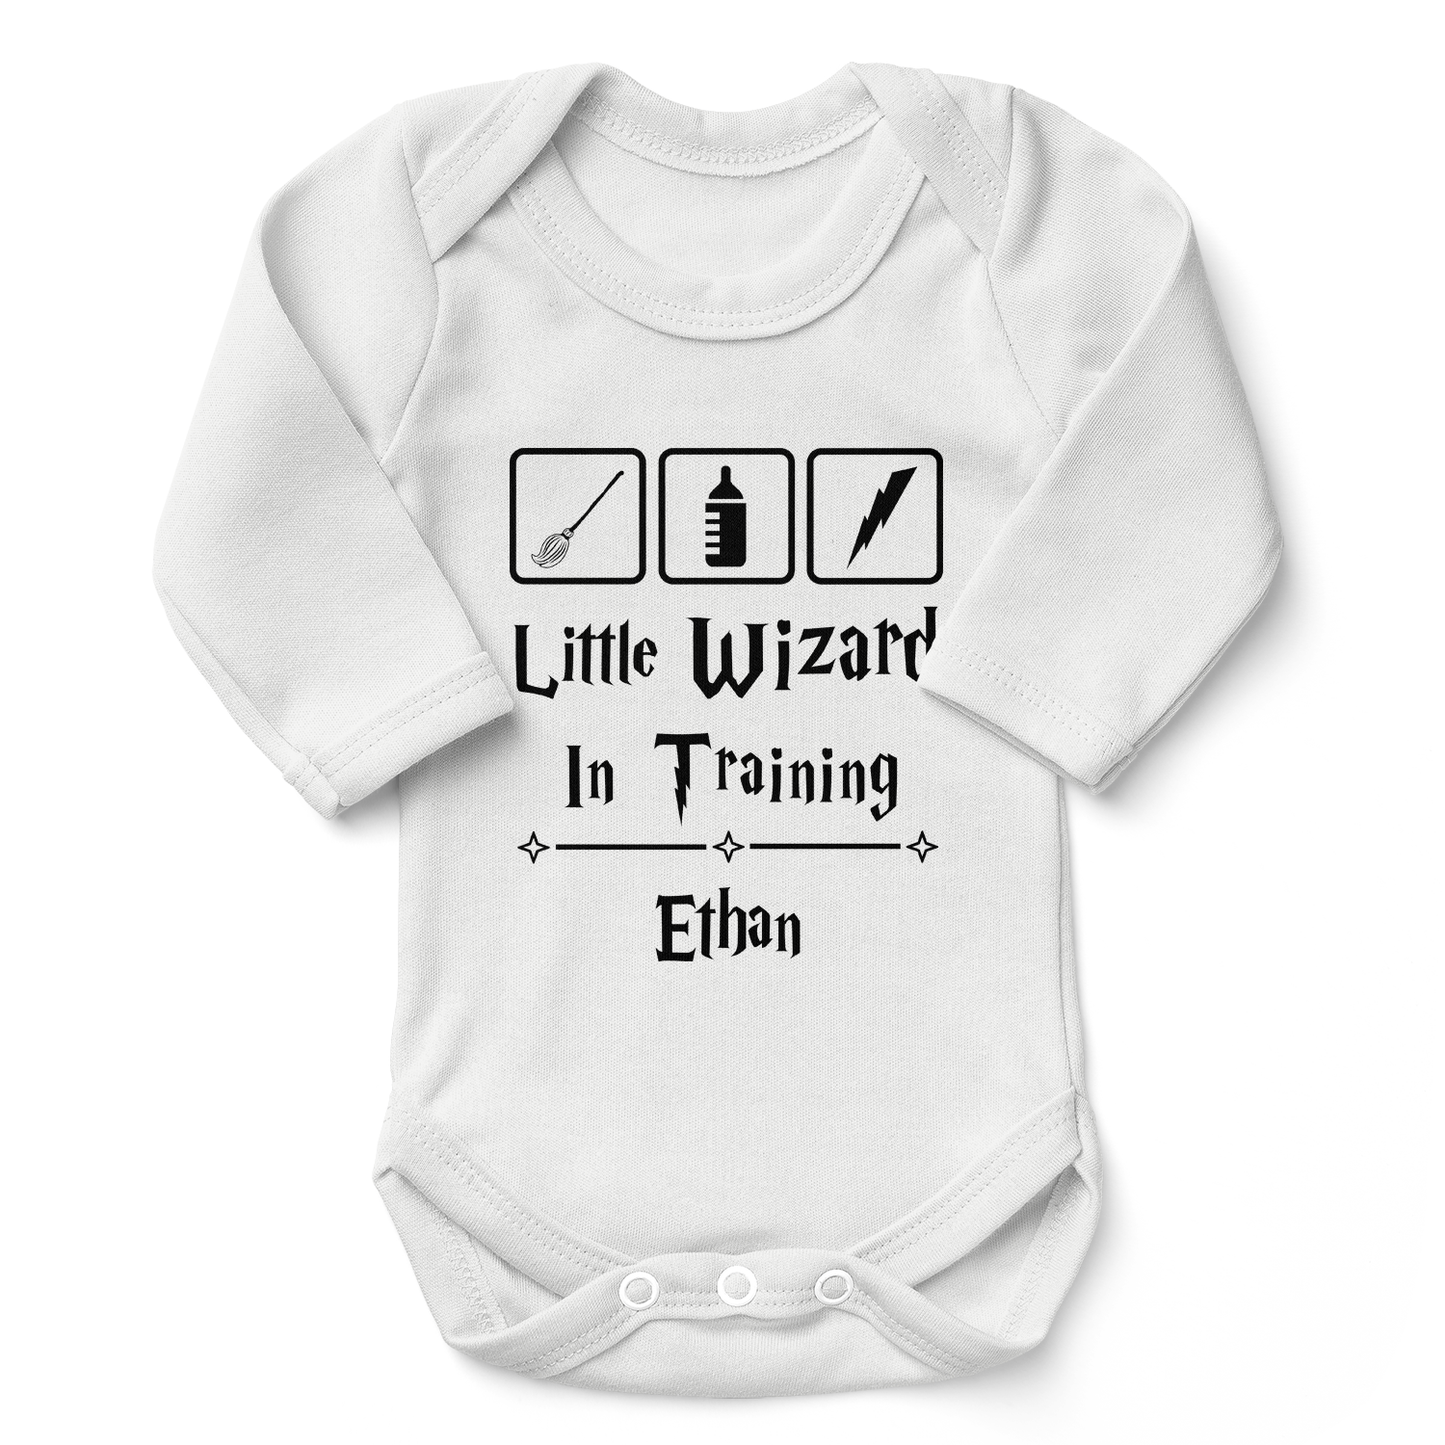 [Personalized] Endanzoo Organic Baby Bodysuit - Little Wizard in Training